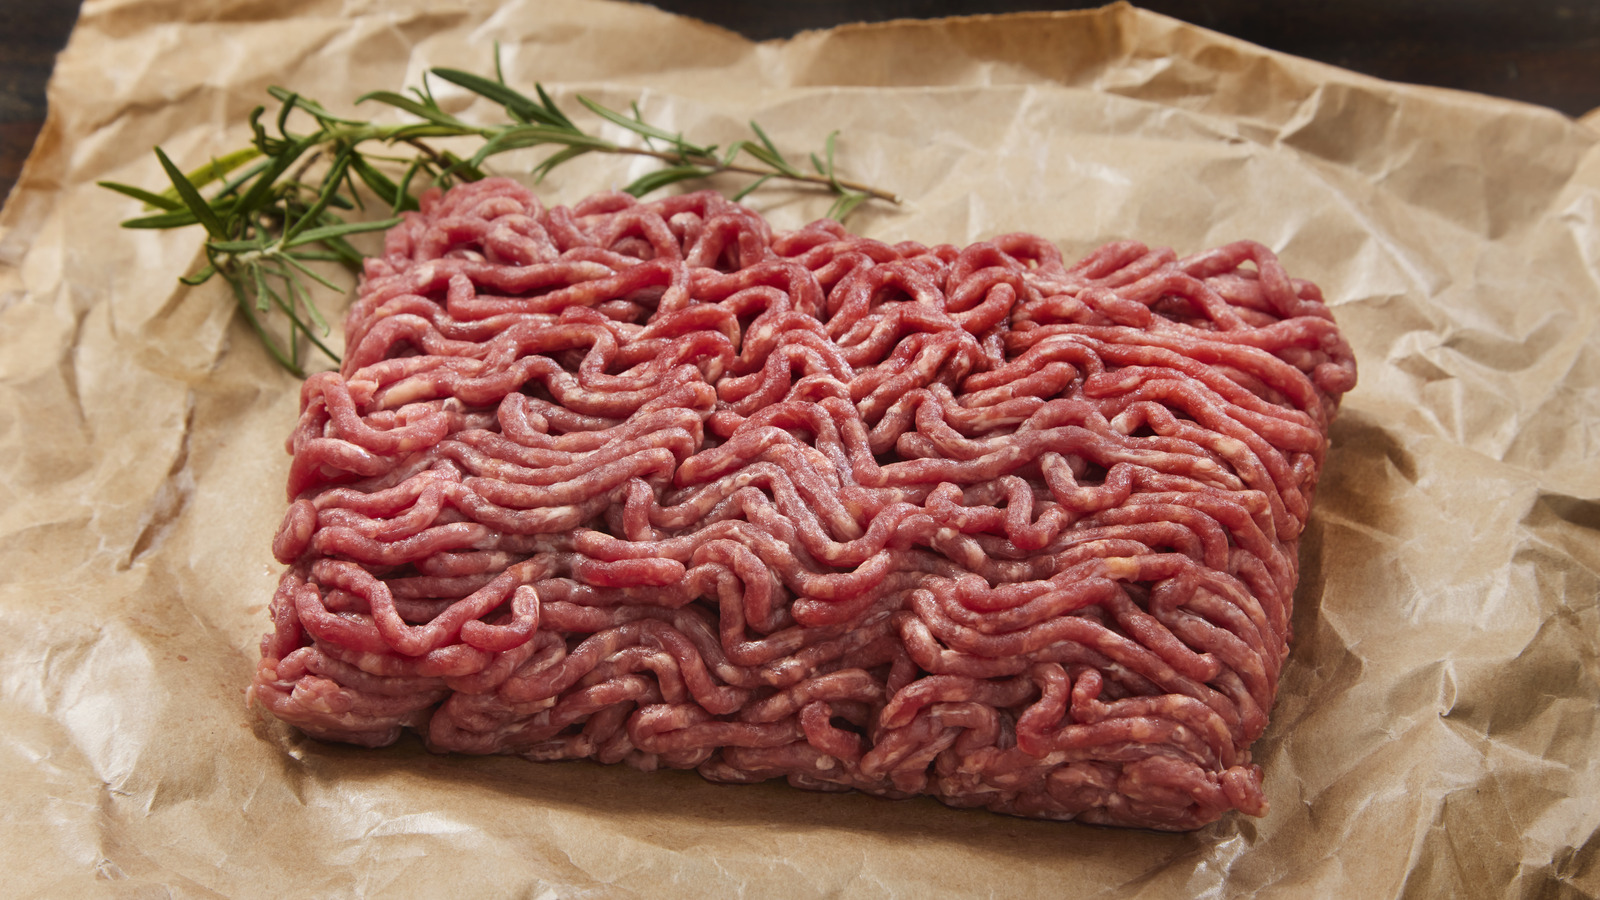 https://www.tastingtable.com/img/gallery/the-baking-tool-that-makes-freezing-ground-beef-a-breeze/l-intro-1690248801.jpg